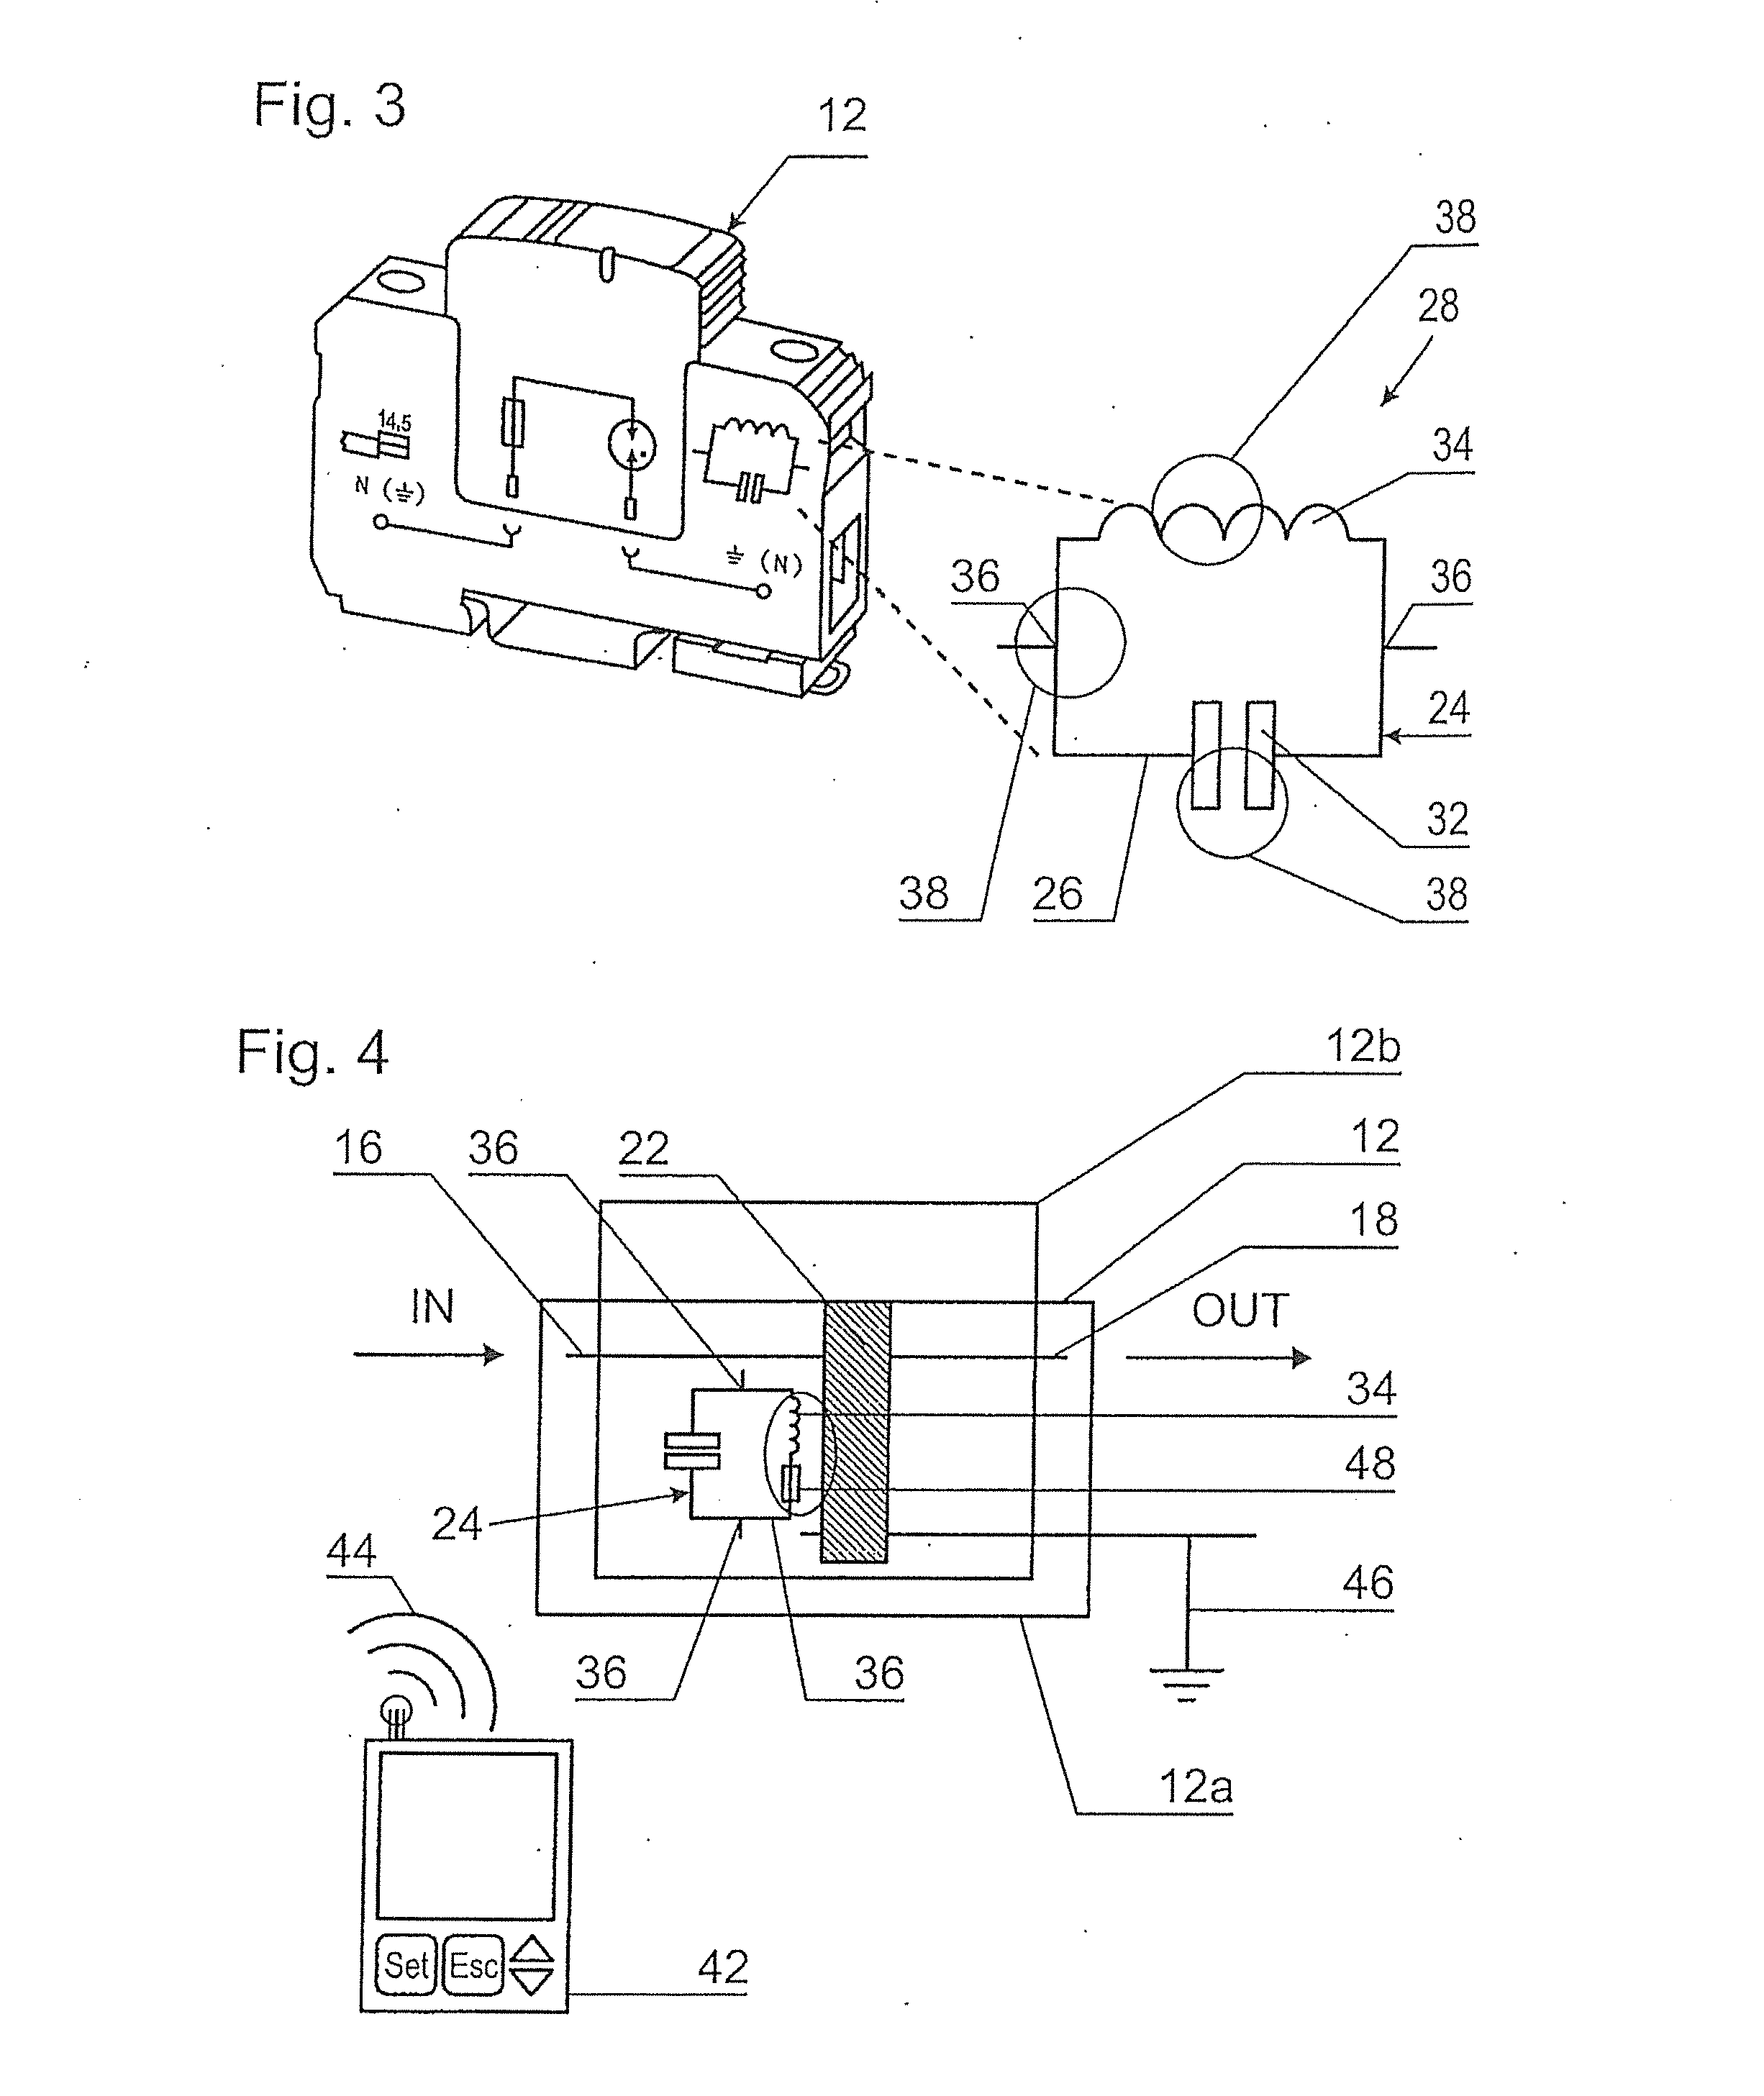 State Monitoring or Diagnostics System